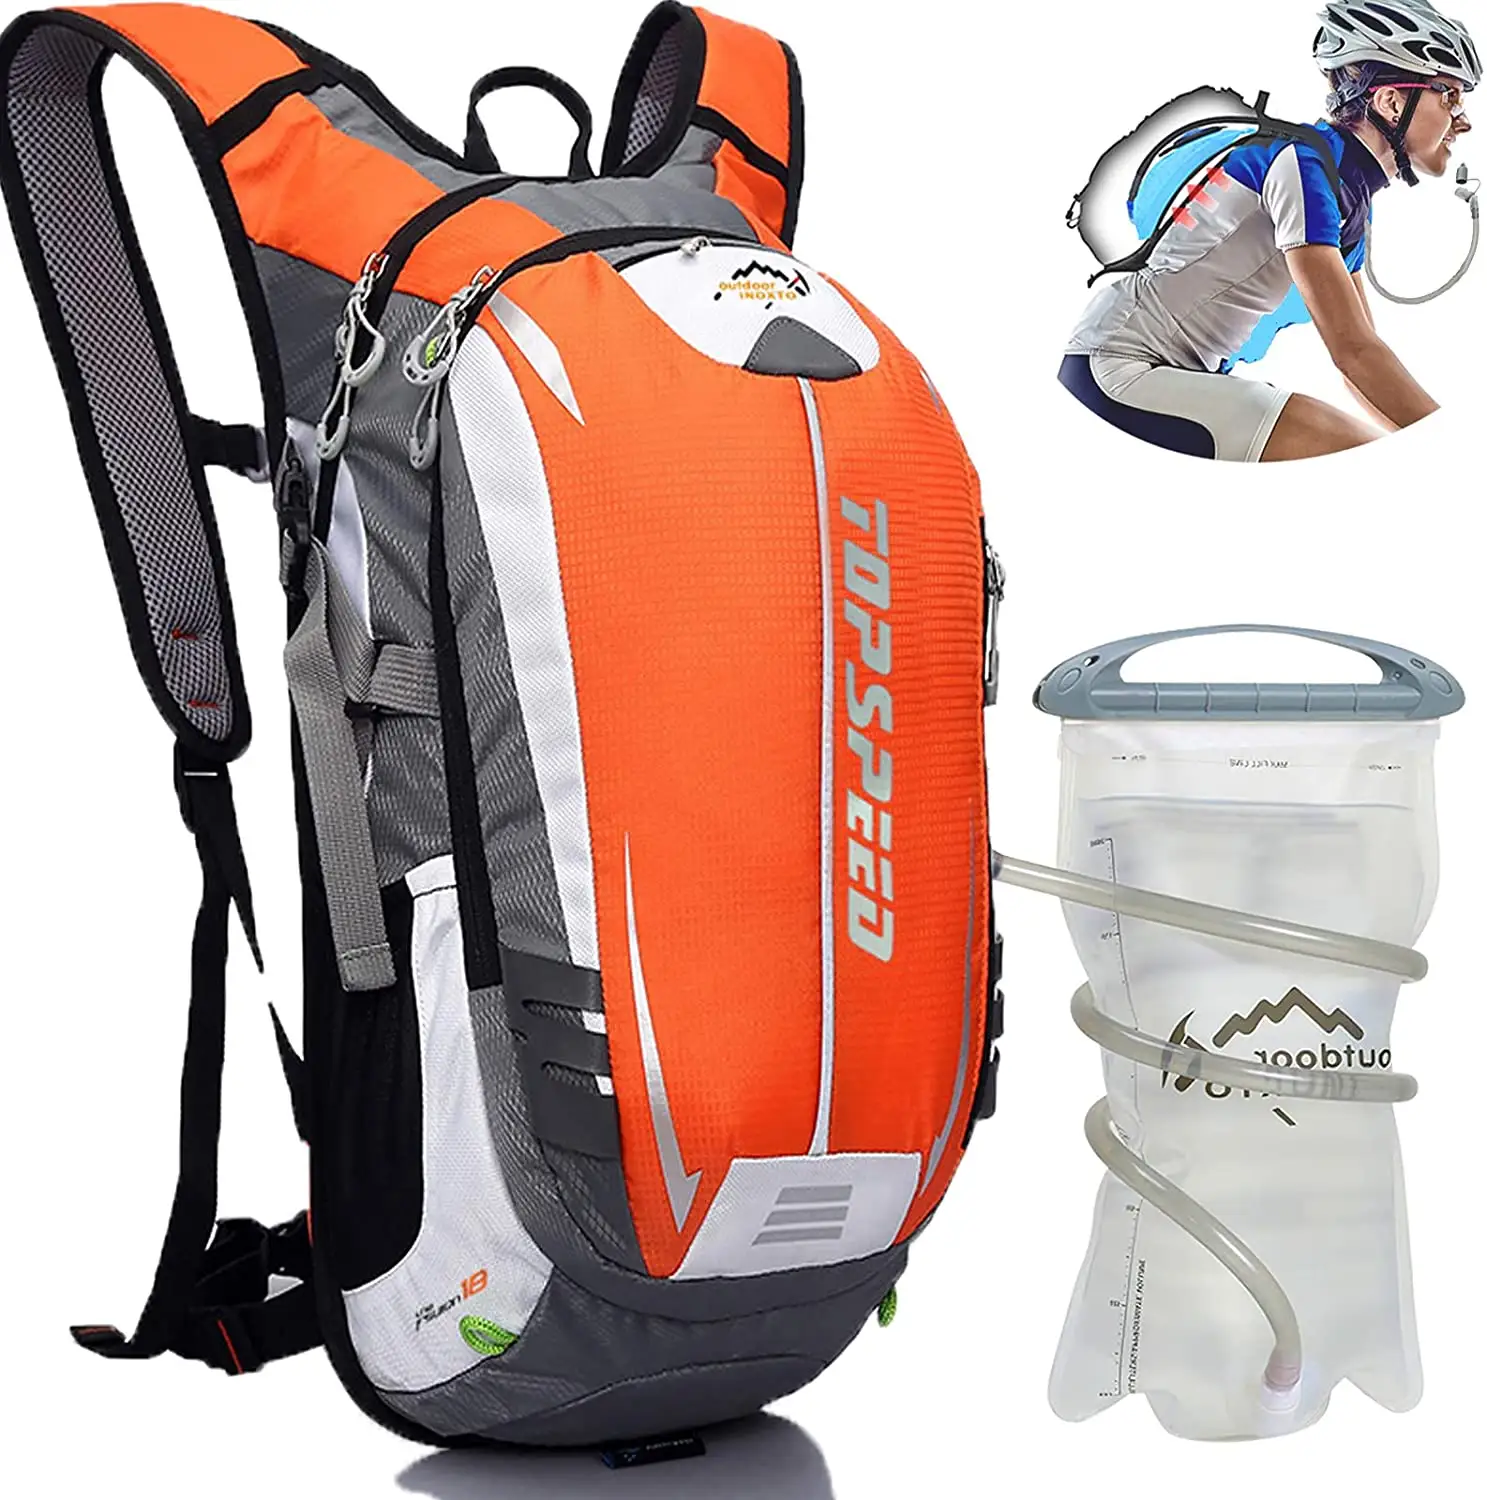 18L Ultralight Climbing Waterproof Outdoor Sports Travel Hiking Hydration Backpack